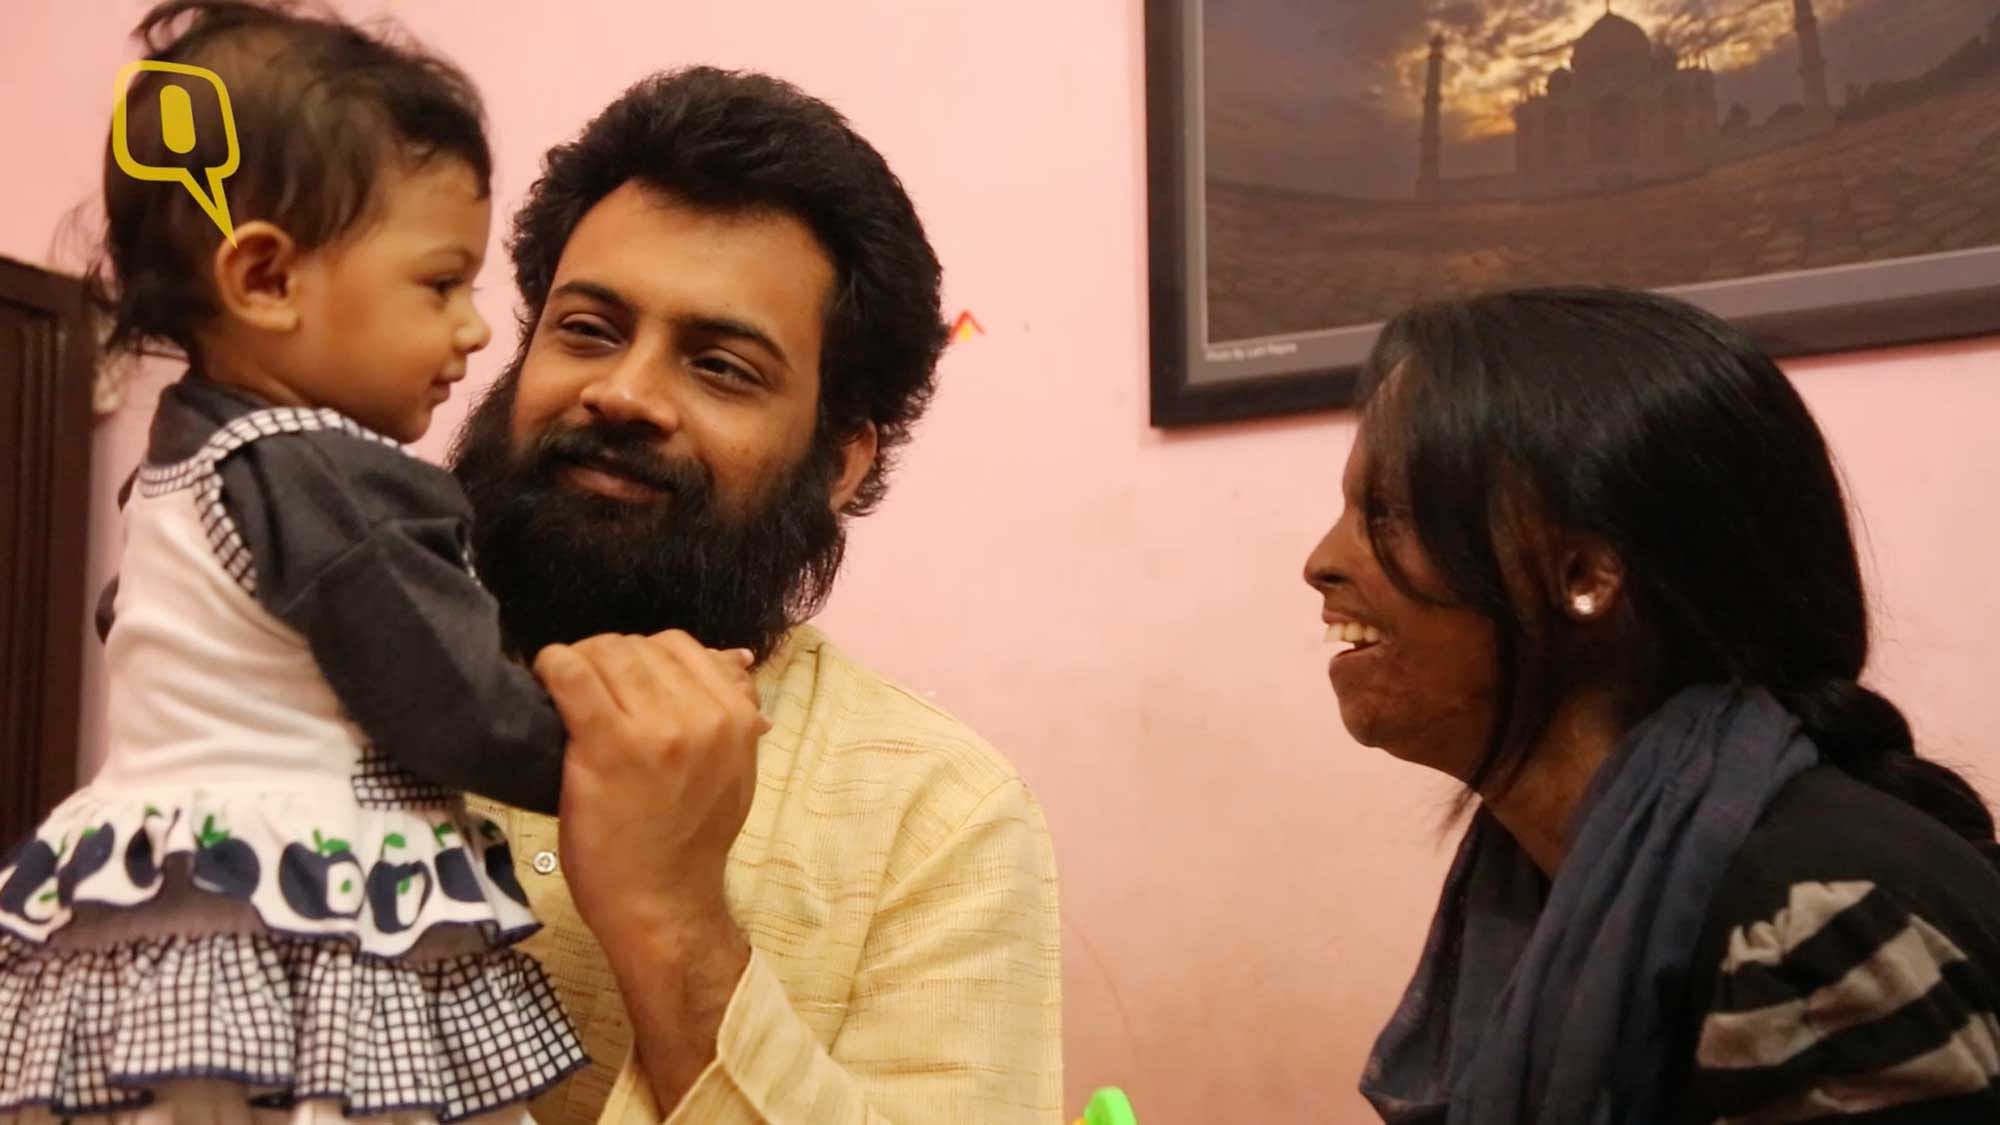 Laxmi, the anti-acid activist (Right) with her partner Alok Dixit and their daughter Pihu. (Photo: The Quint)